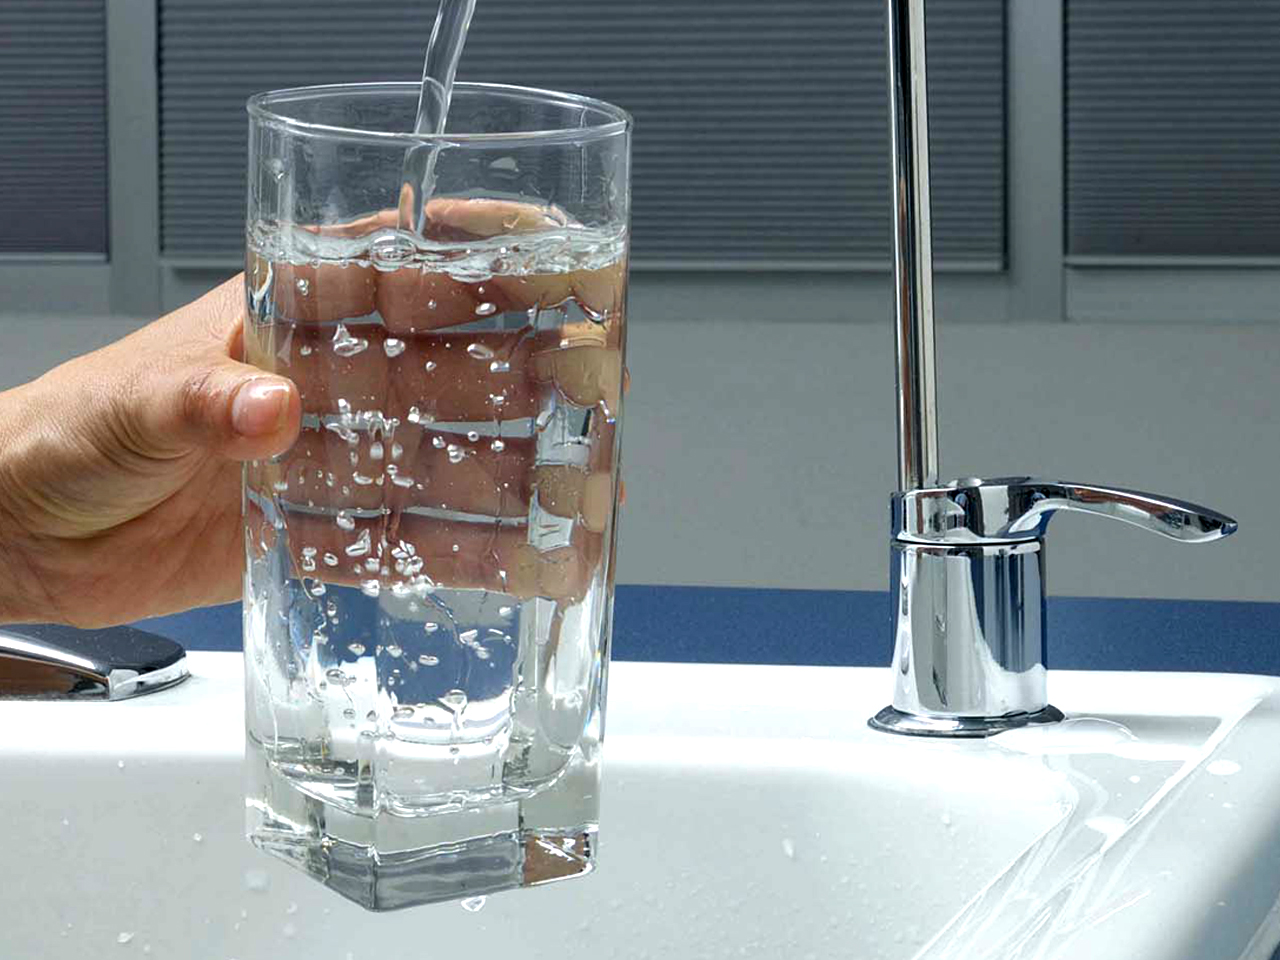 Is The Fluoride in Your Tap Water Linked to Diabetes?